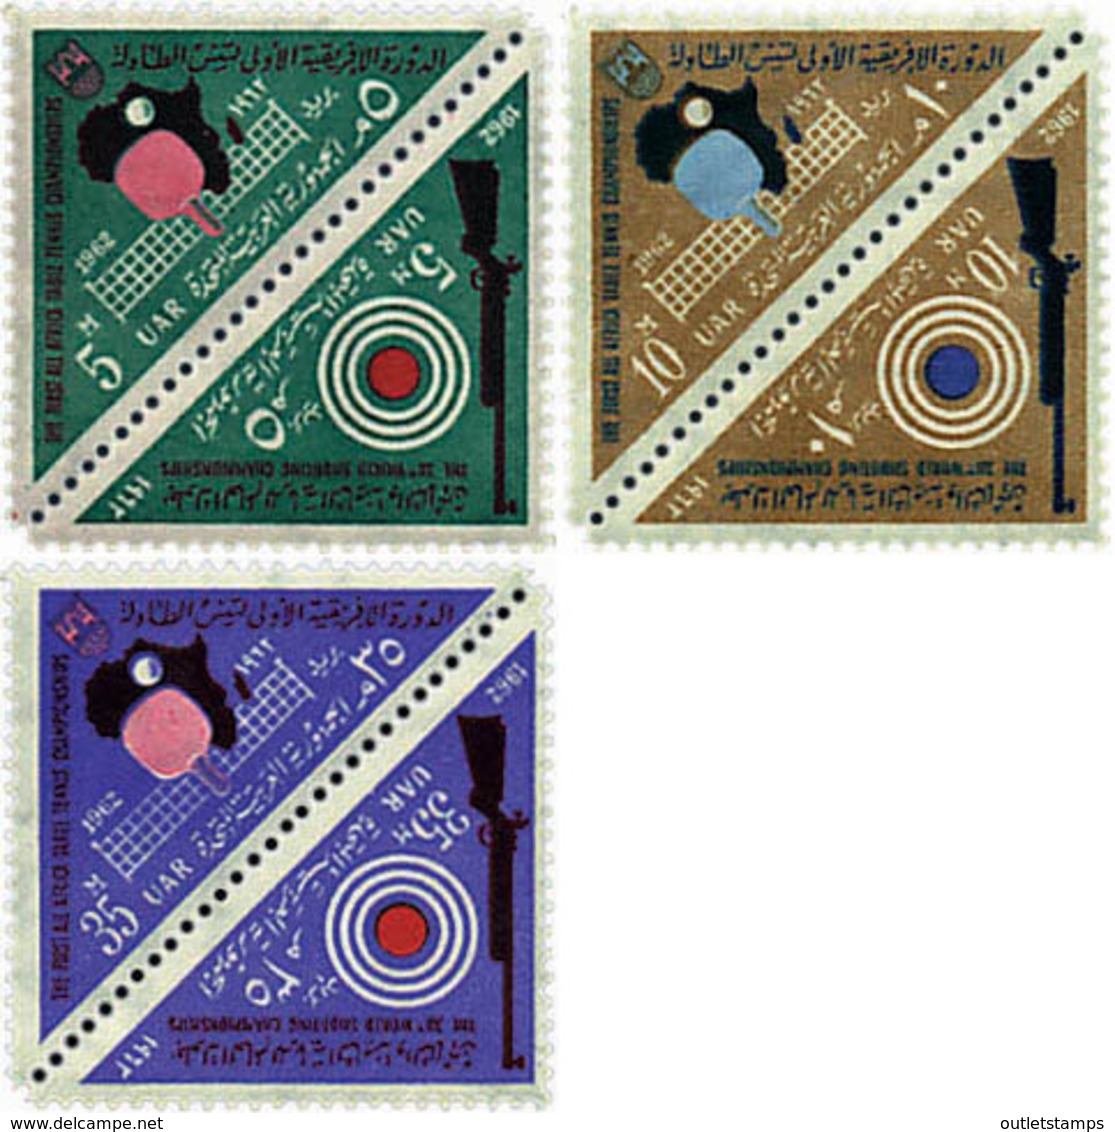 Ref. 229439 * NEW *  - EGYPT . 1962. 1st PING PONG AFRICAN CHAMPIONSHIP AND 38 SHOOTING SHAMPIONSHIP. 1 CAMPEONATO AFRIC - Unused Stamps